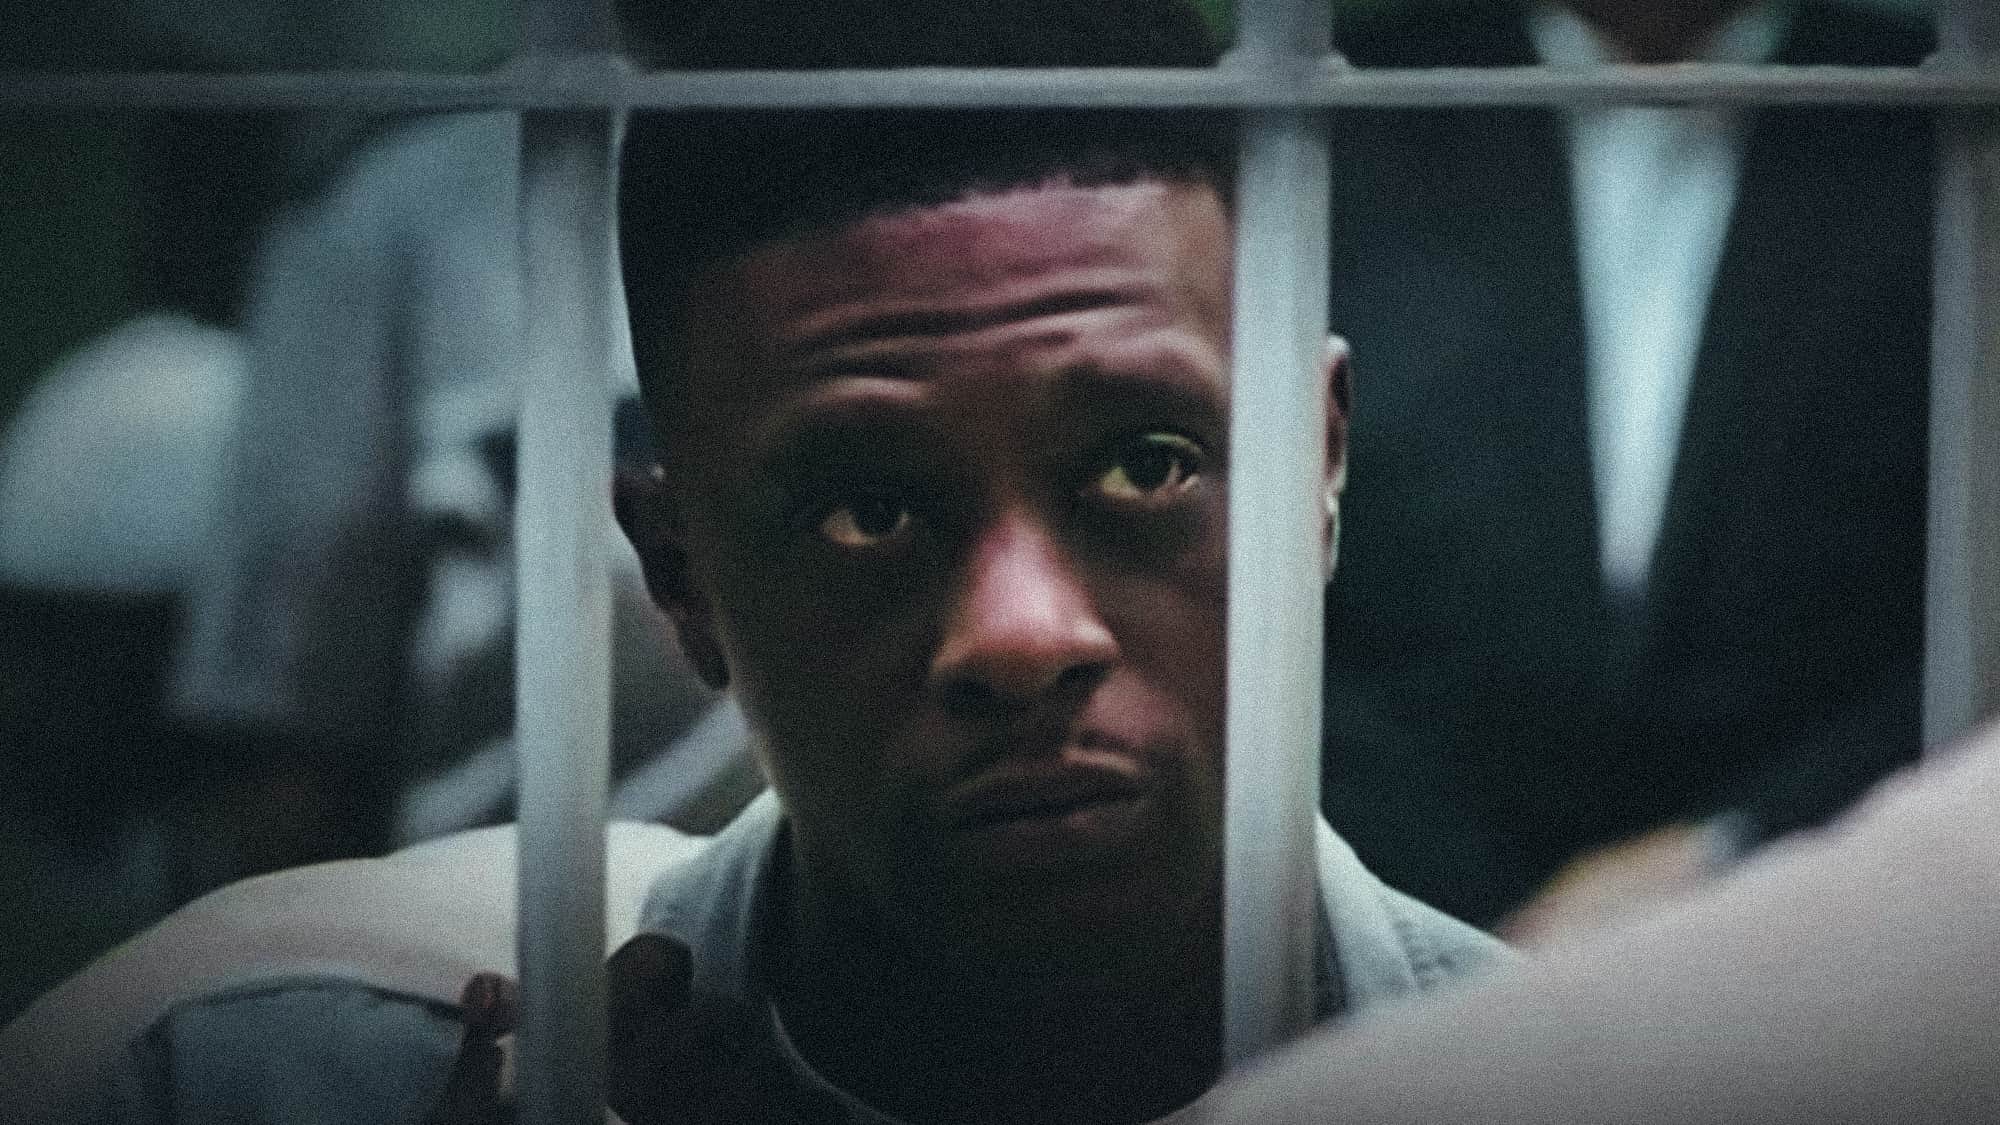 Boosie's Film "My Struggle" is set in his hometown Baton Rouge, Louisiana and was co-produced by Joe Yung Spike. The film is based on his life story and illustrates how he overcame difficulties growing up in his hometown. This promising movie is now available online.